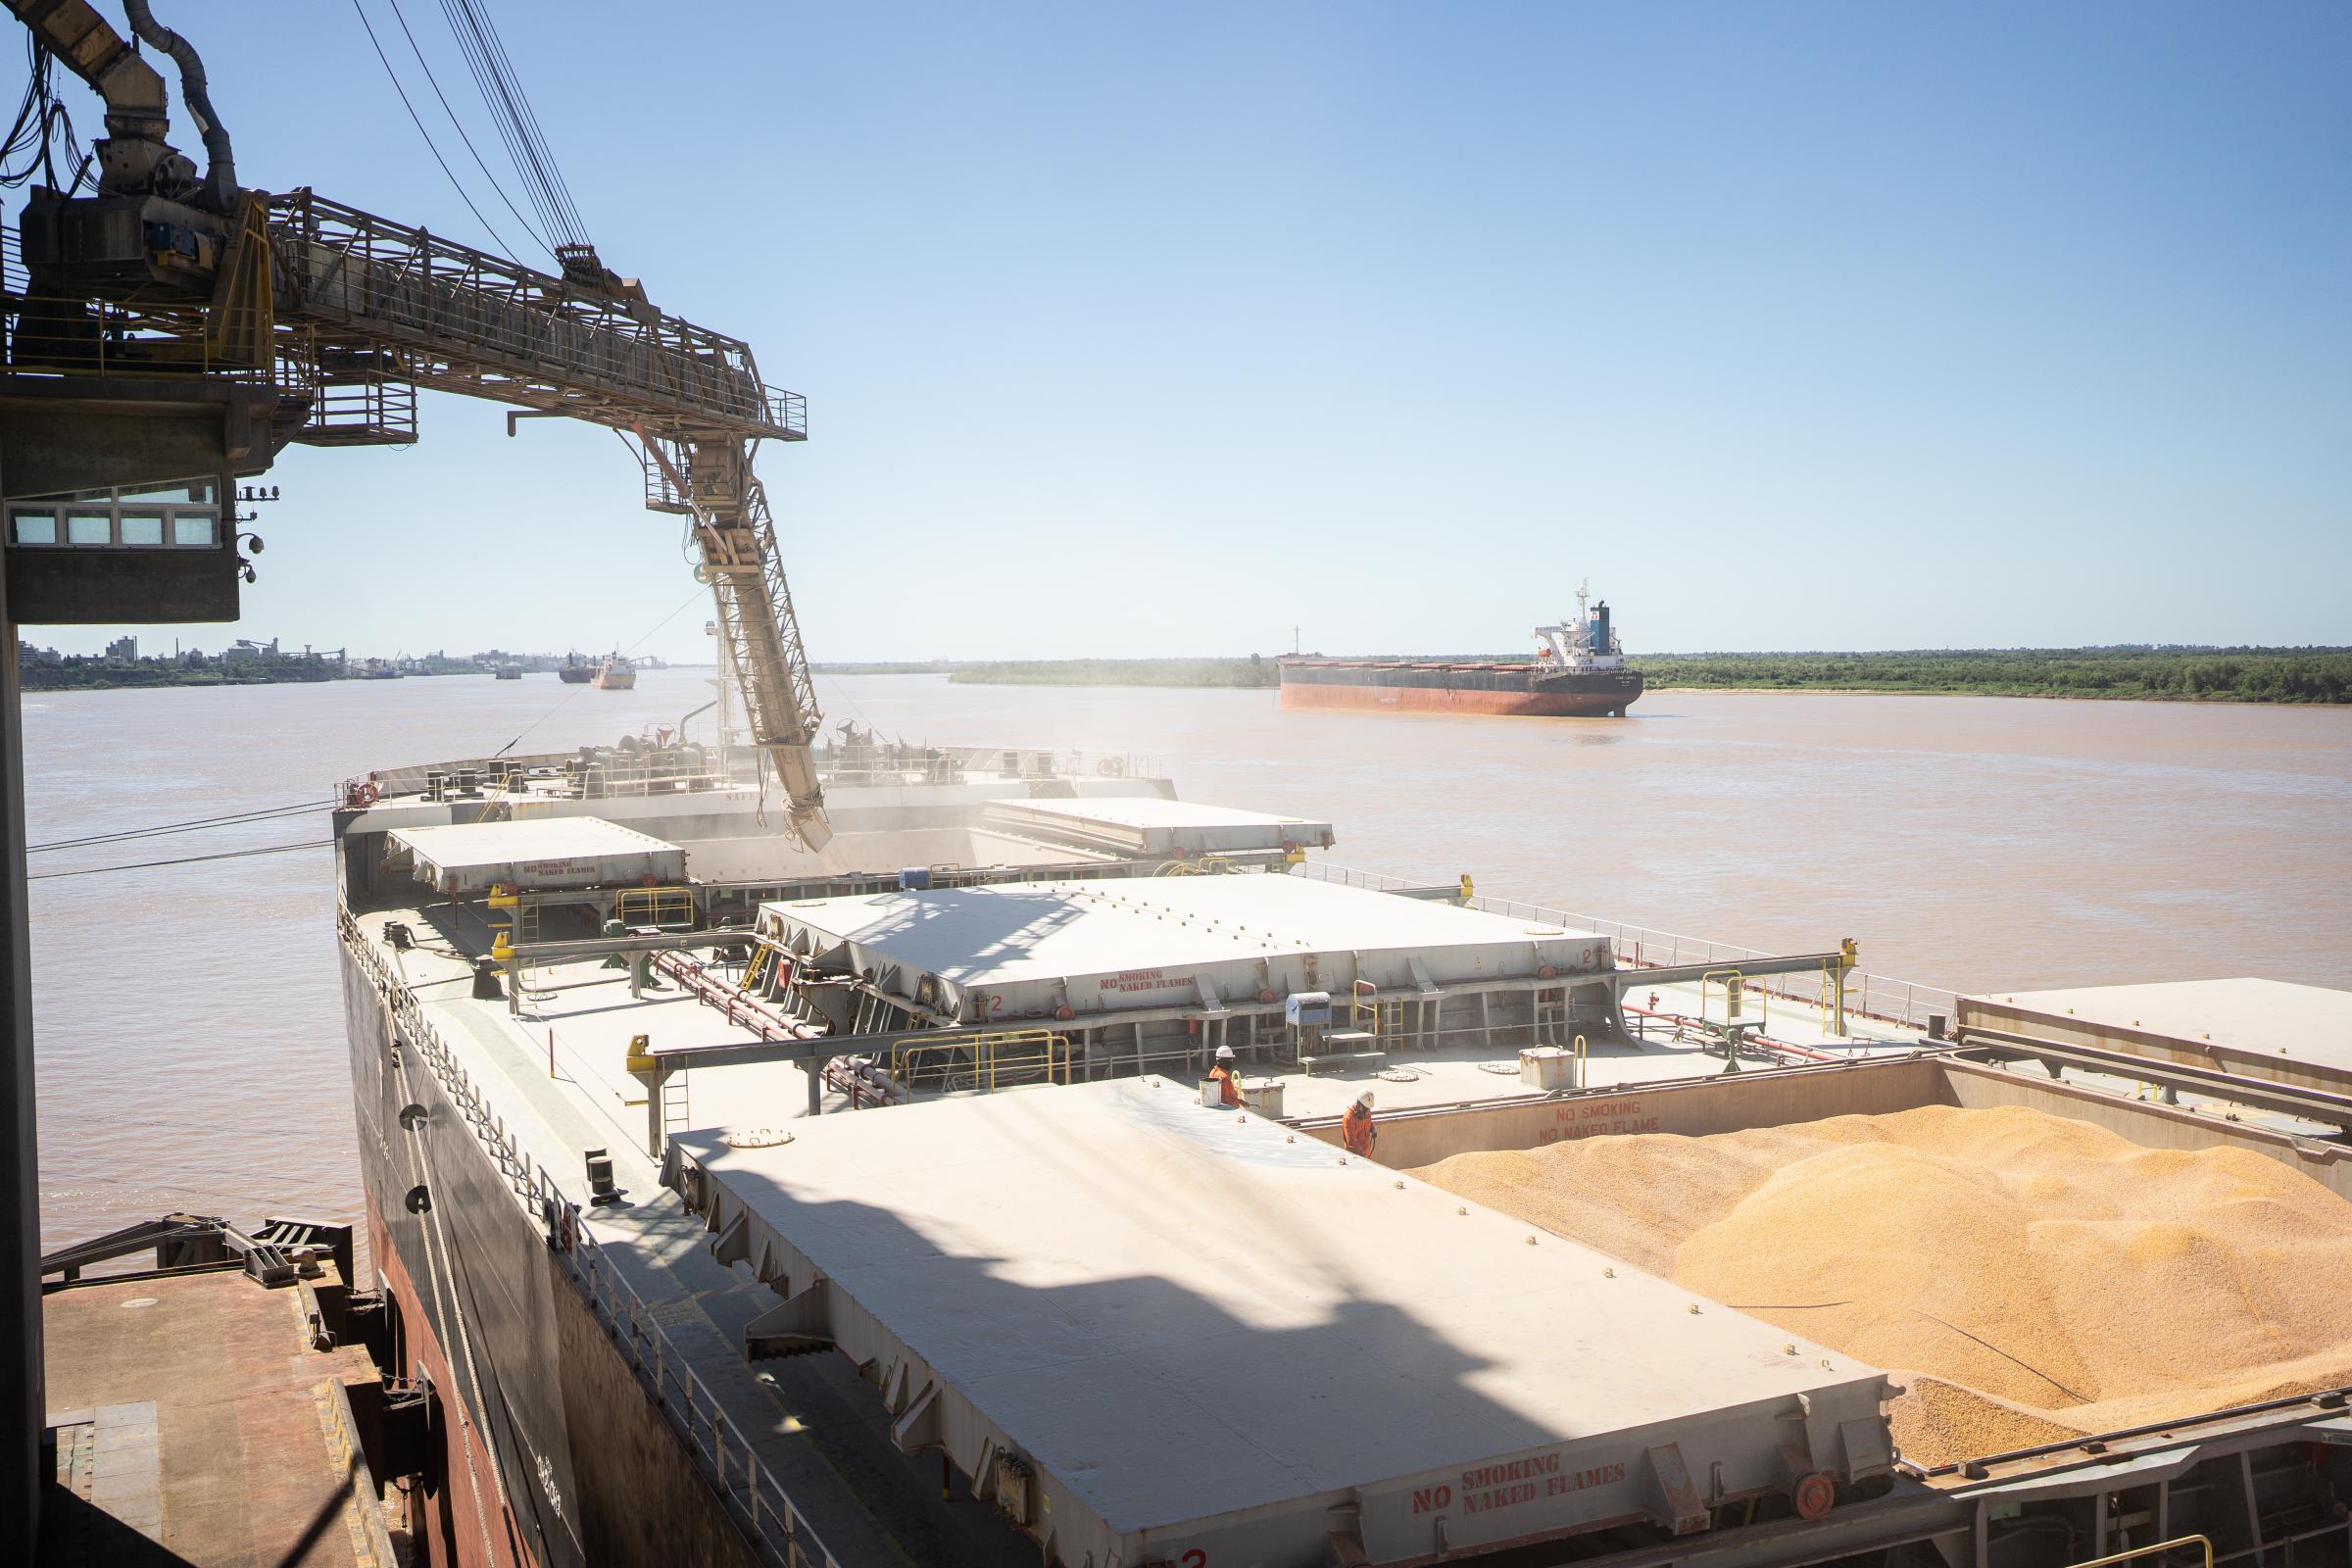 Argentine soybeans - A ship is being loaded with soybeans, with the Paraná...